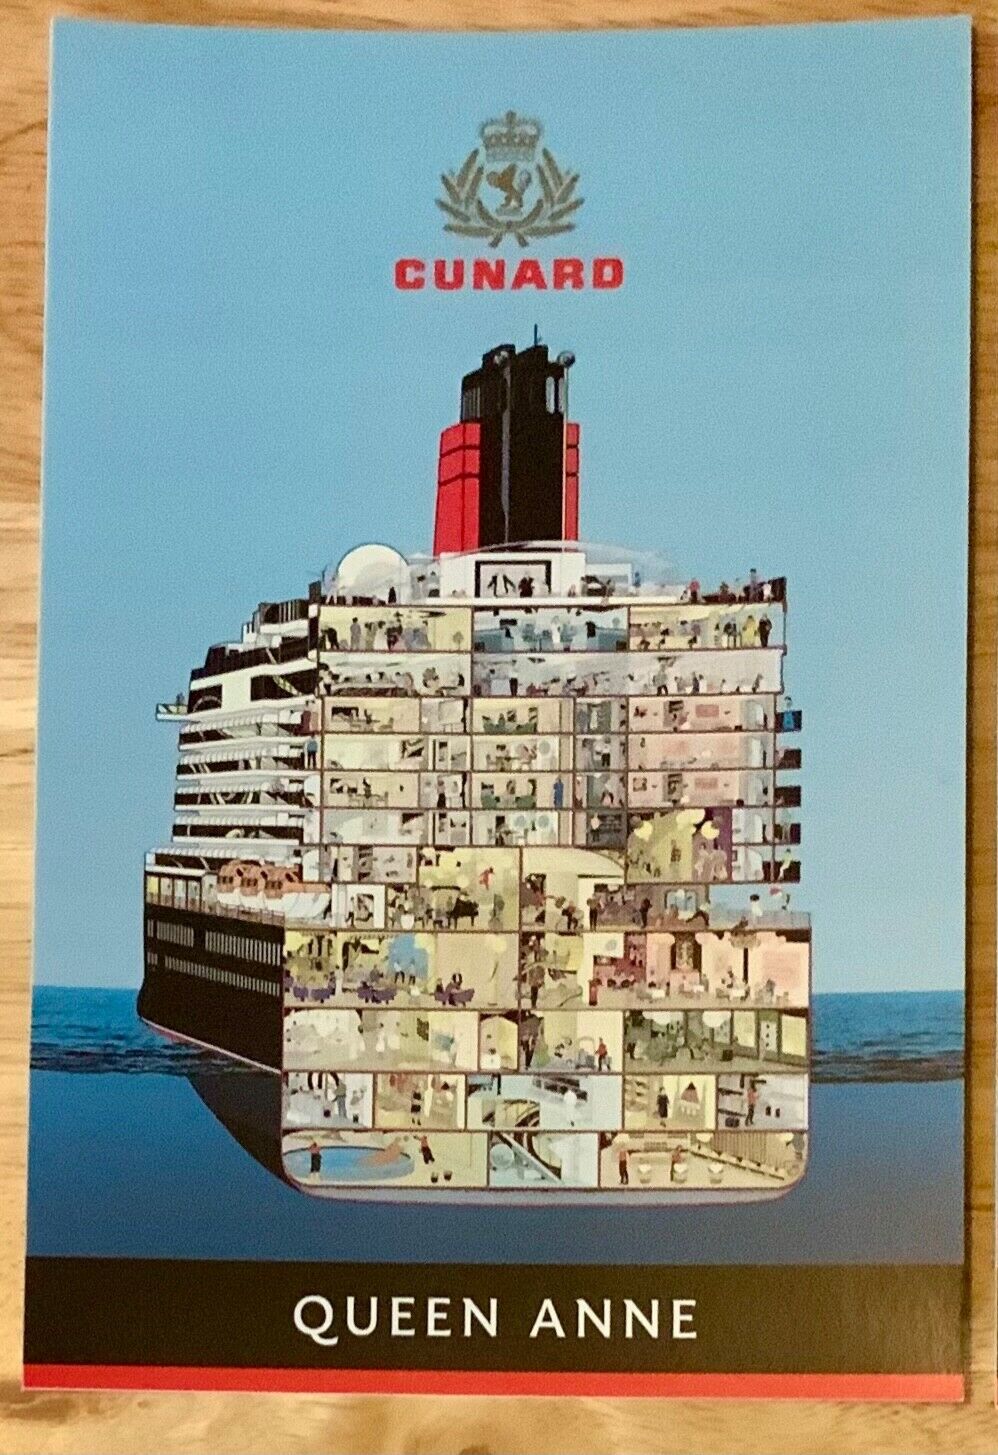 1 new Cunard Cruise line Queen Anne Postcard available Only On The Ship